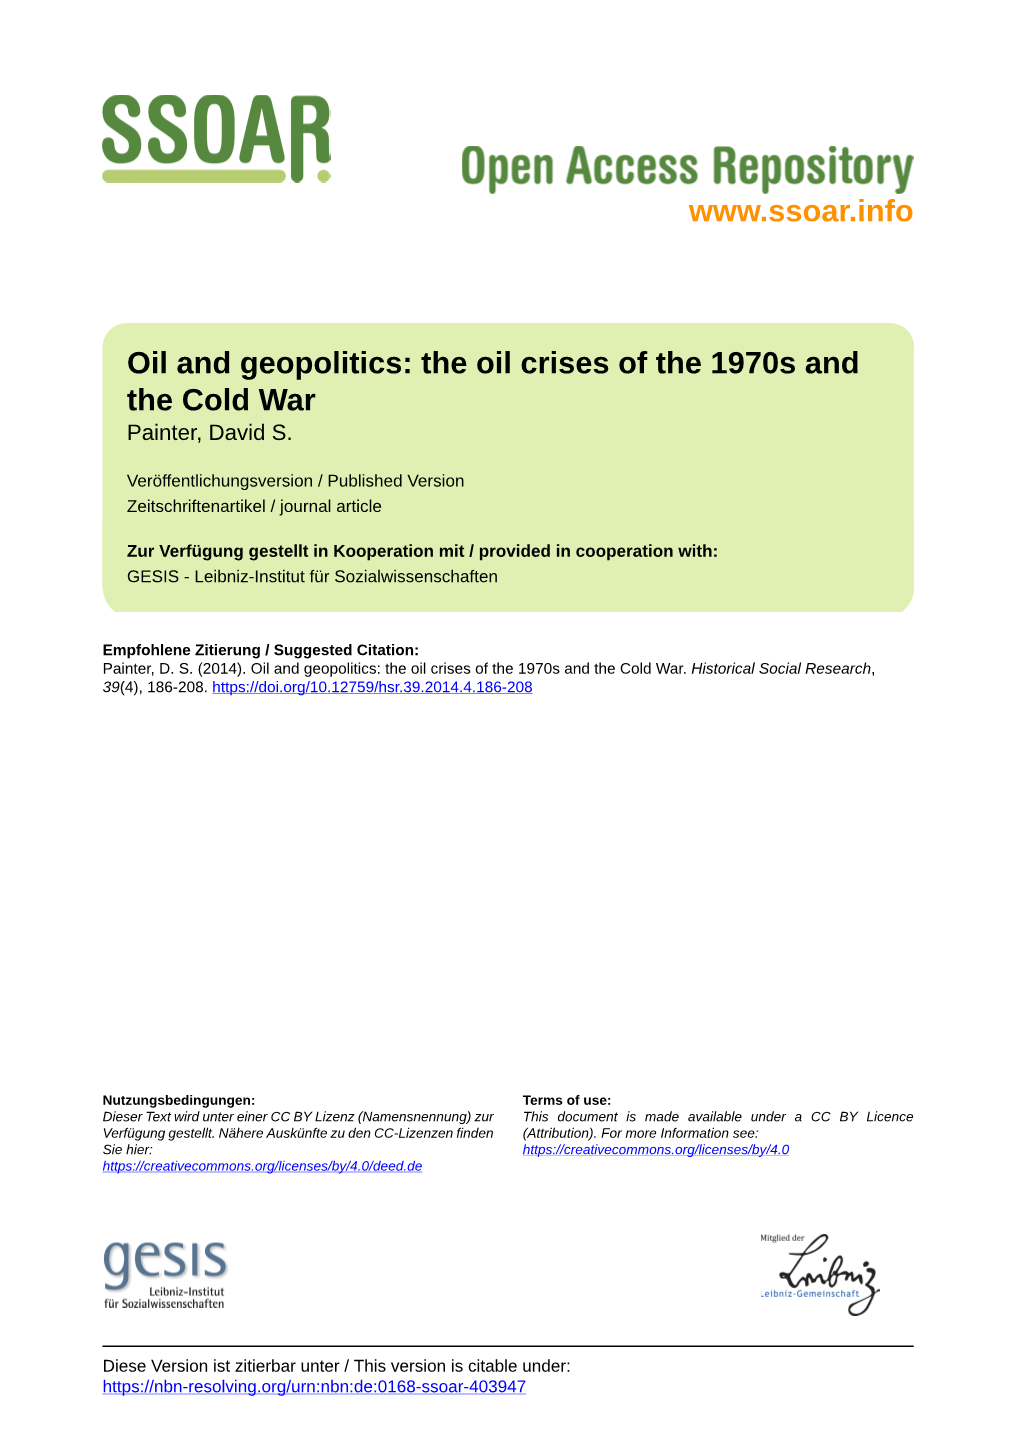 “Oil and Geopolitics: the Oil Crises of the 1970S and the Cold War”